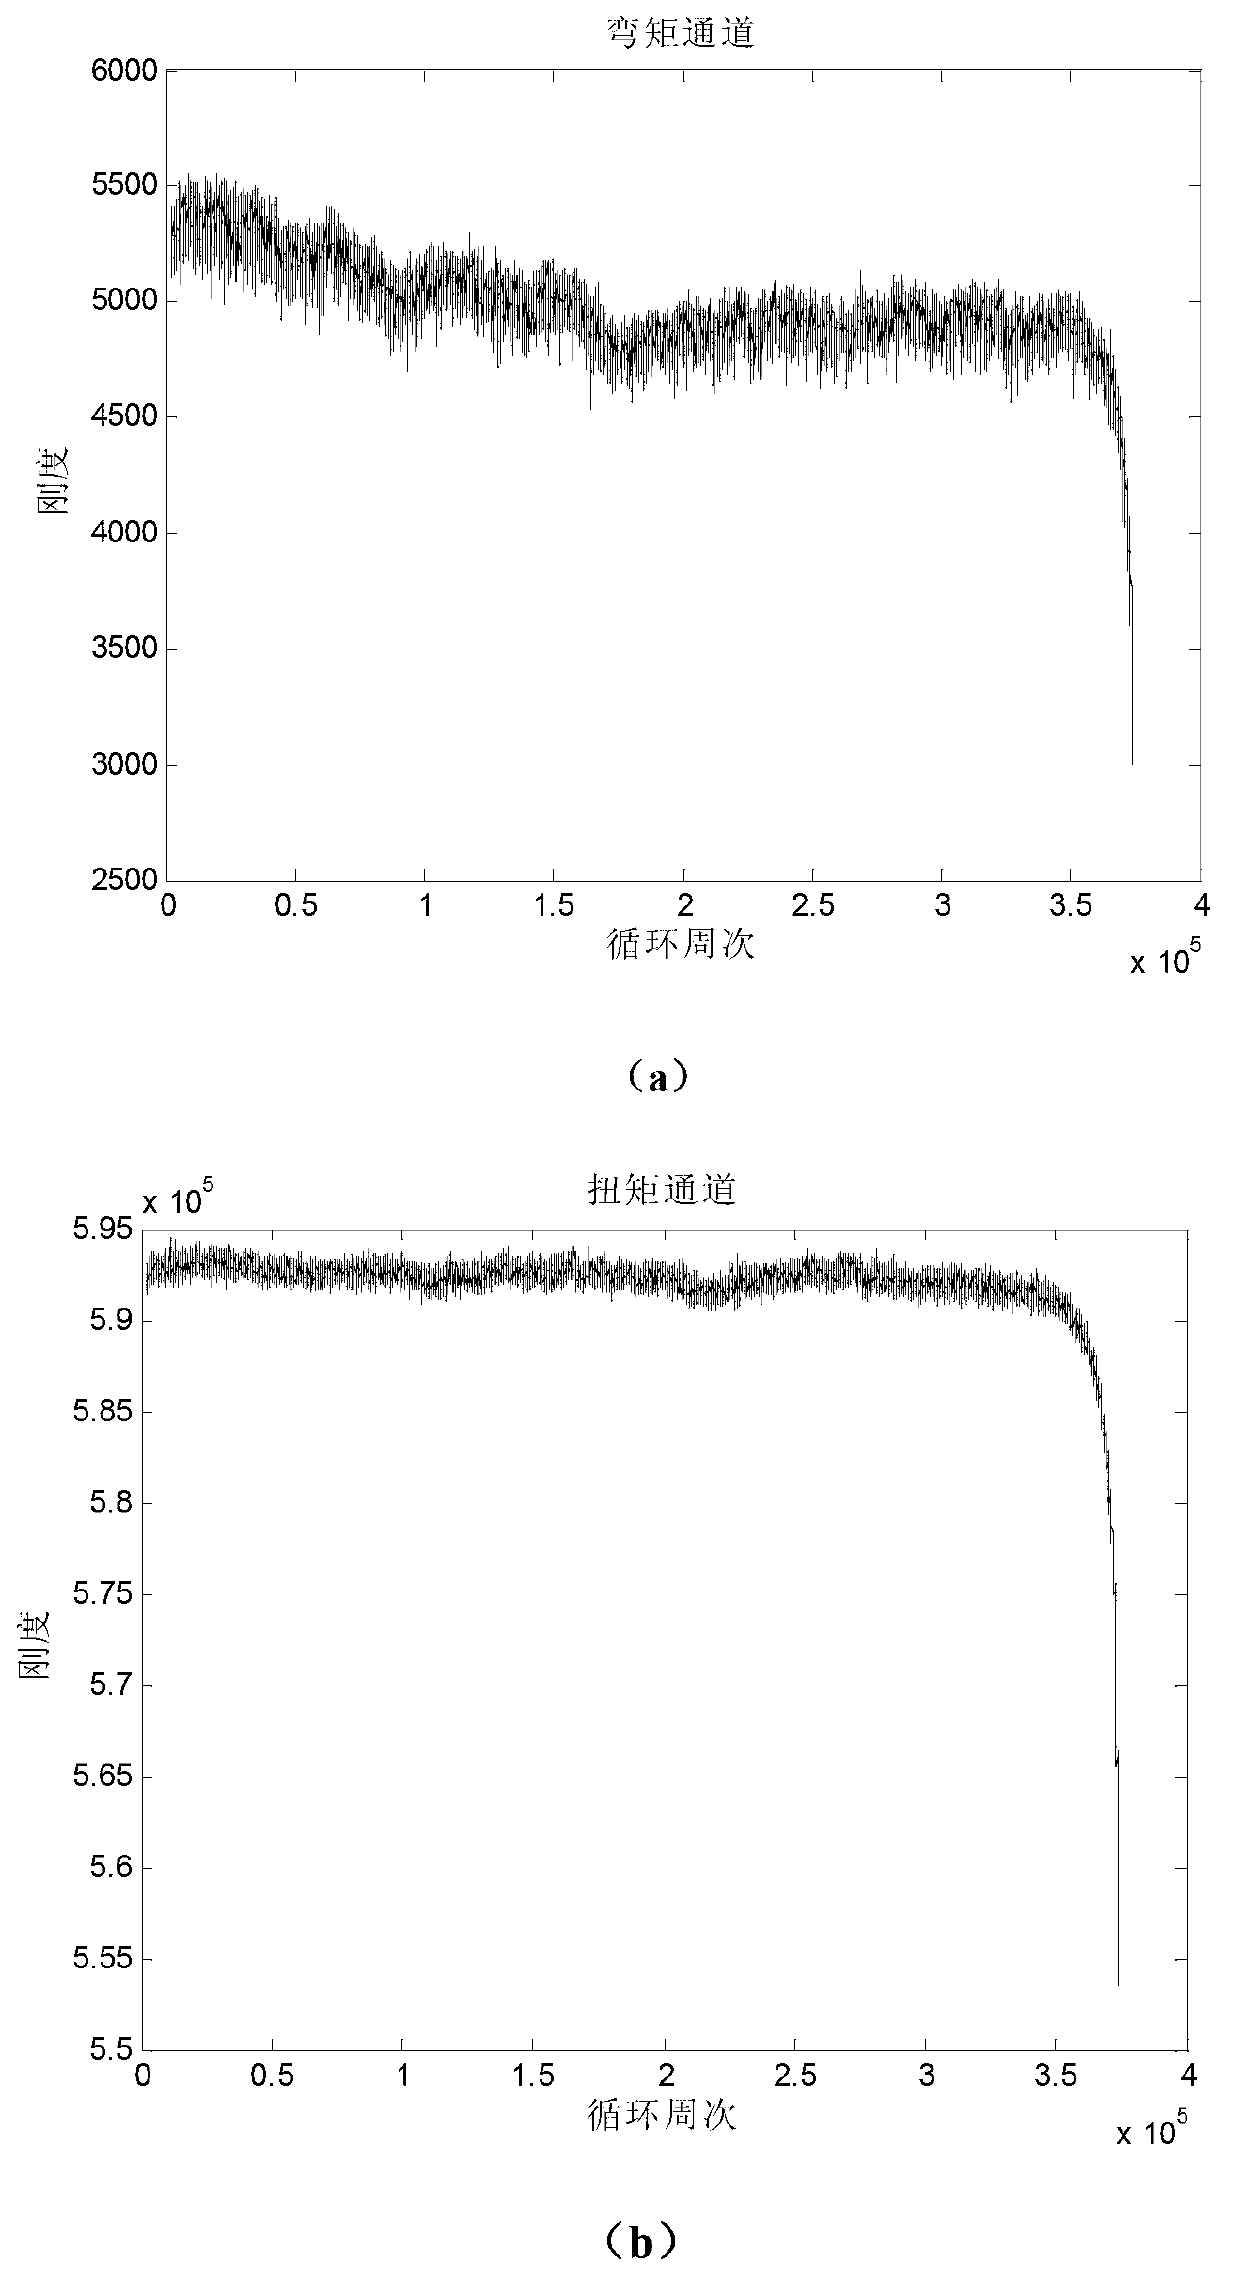 Multivariable support vector machine prediction method for aero-engine rotor residual life